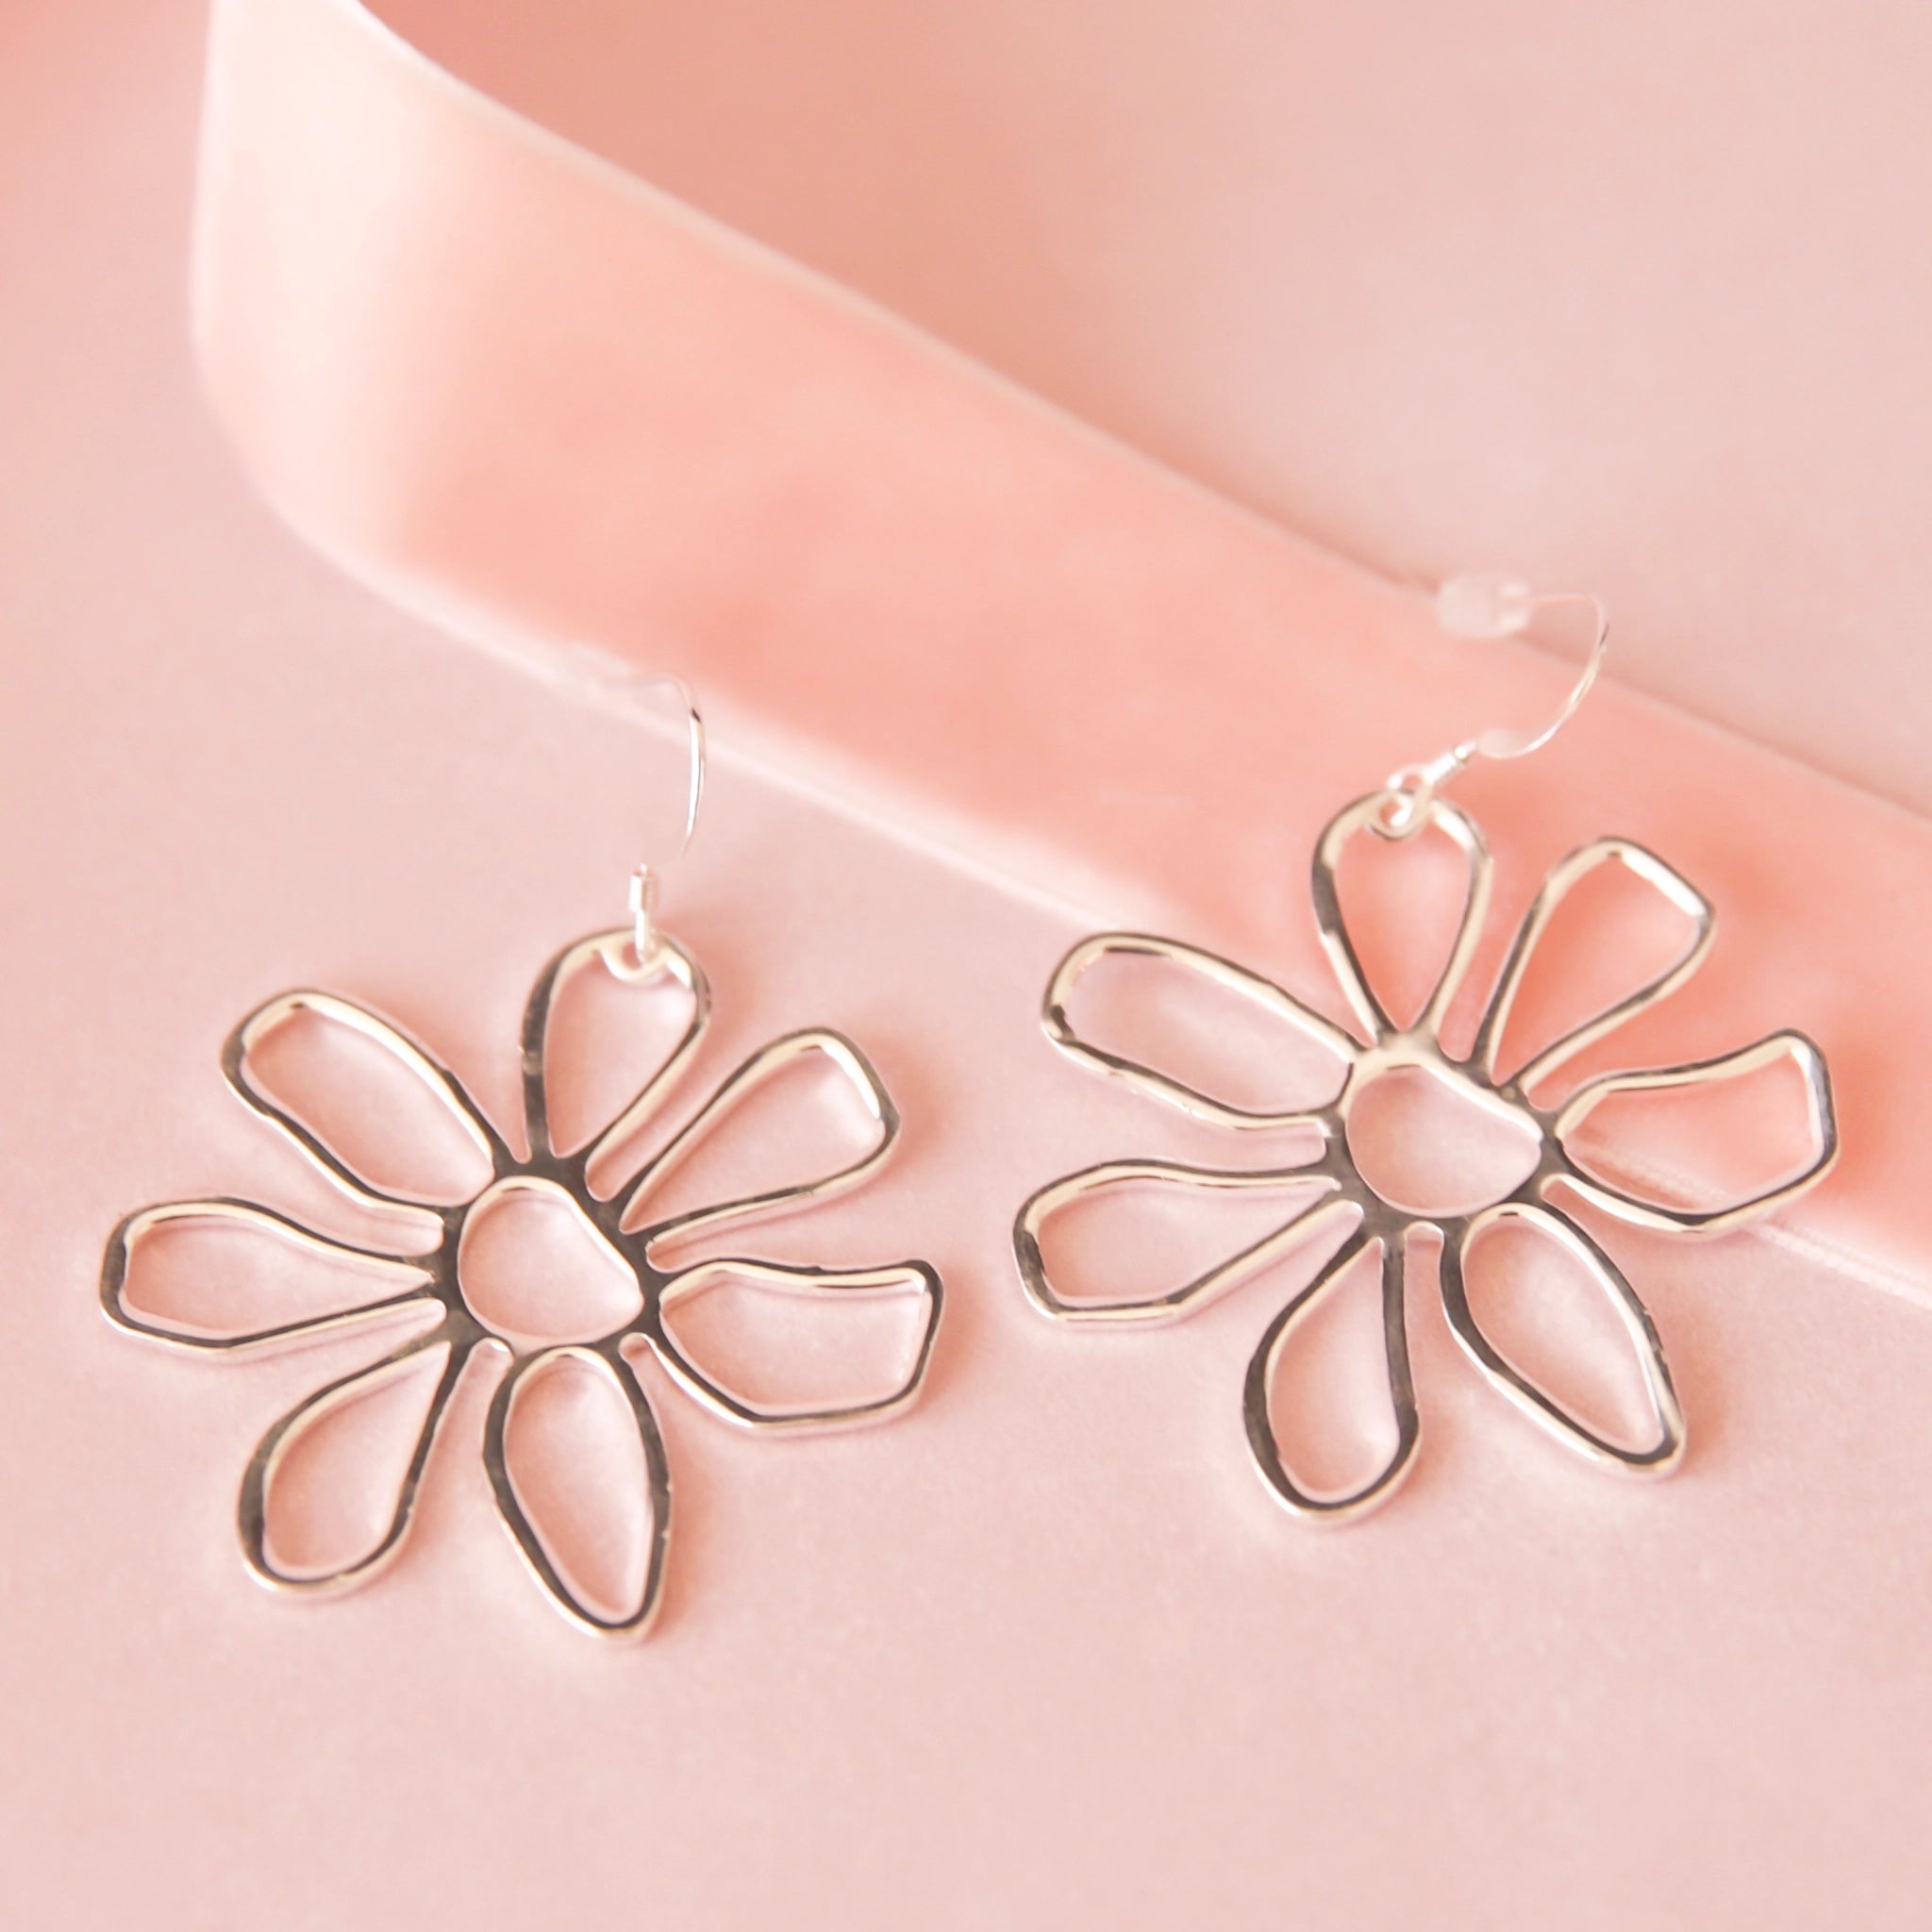 A pair of silver floral earrings lay on a pink background